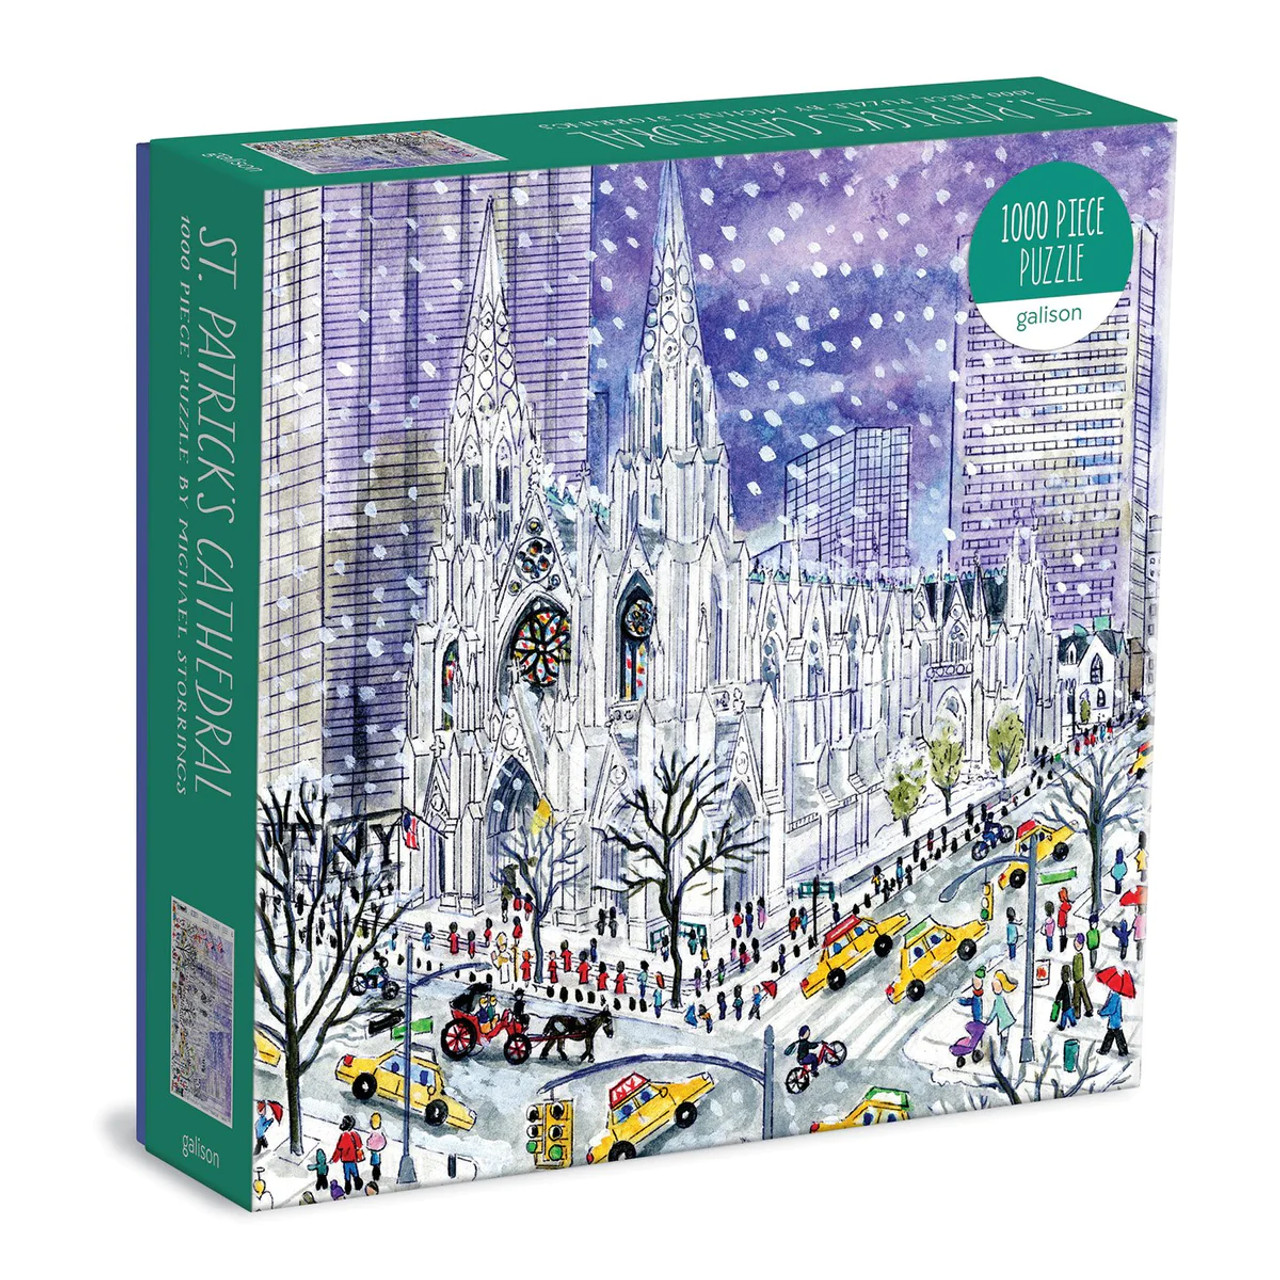 Michael Storrings St. Patricks Cathedral 1000 Piece Jigsaw Puzzle